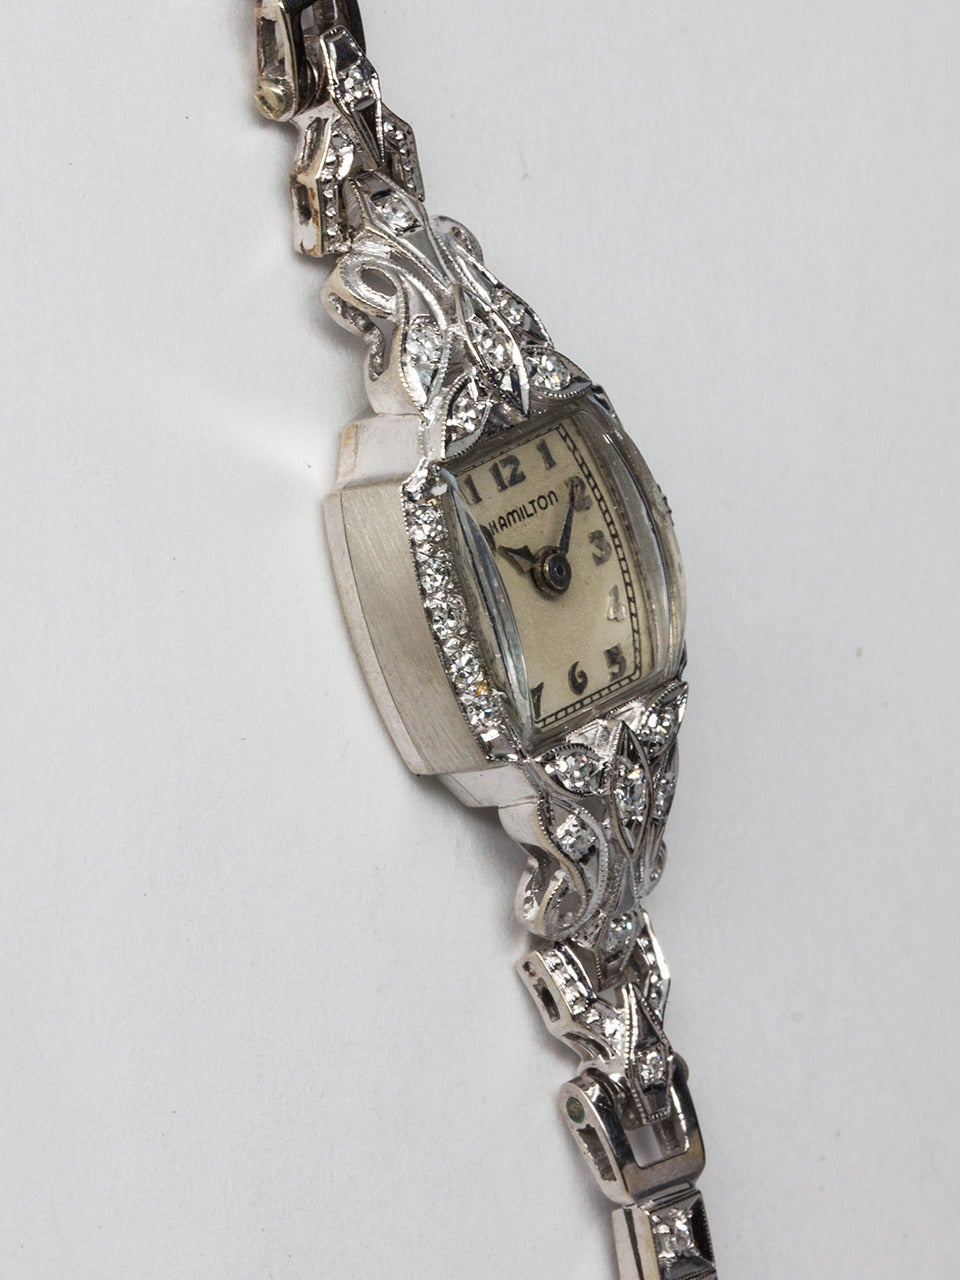 Lady Hamilton 14K White Gold Diamond Dress Wristwatch circa 1940s. Marquise shaped watch with hinged lugs and with associated 14K white gold diamond set box link bracelet with clasp. Very pretty model with dome crystal, matte silvered dial with